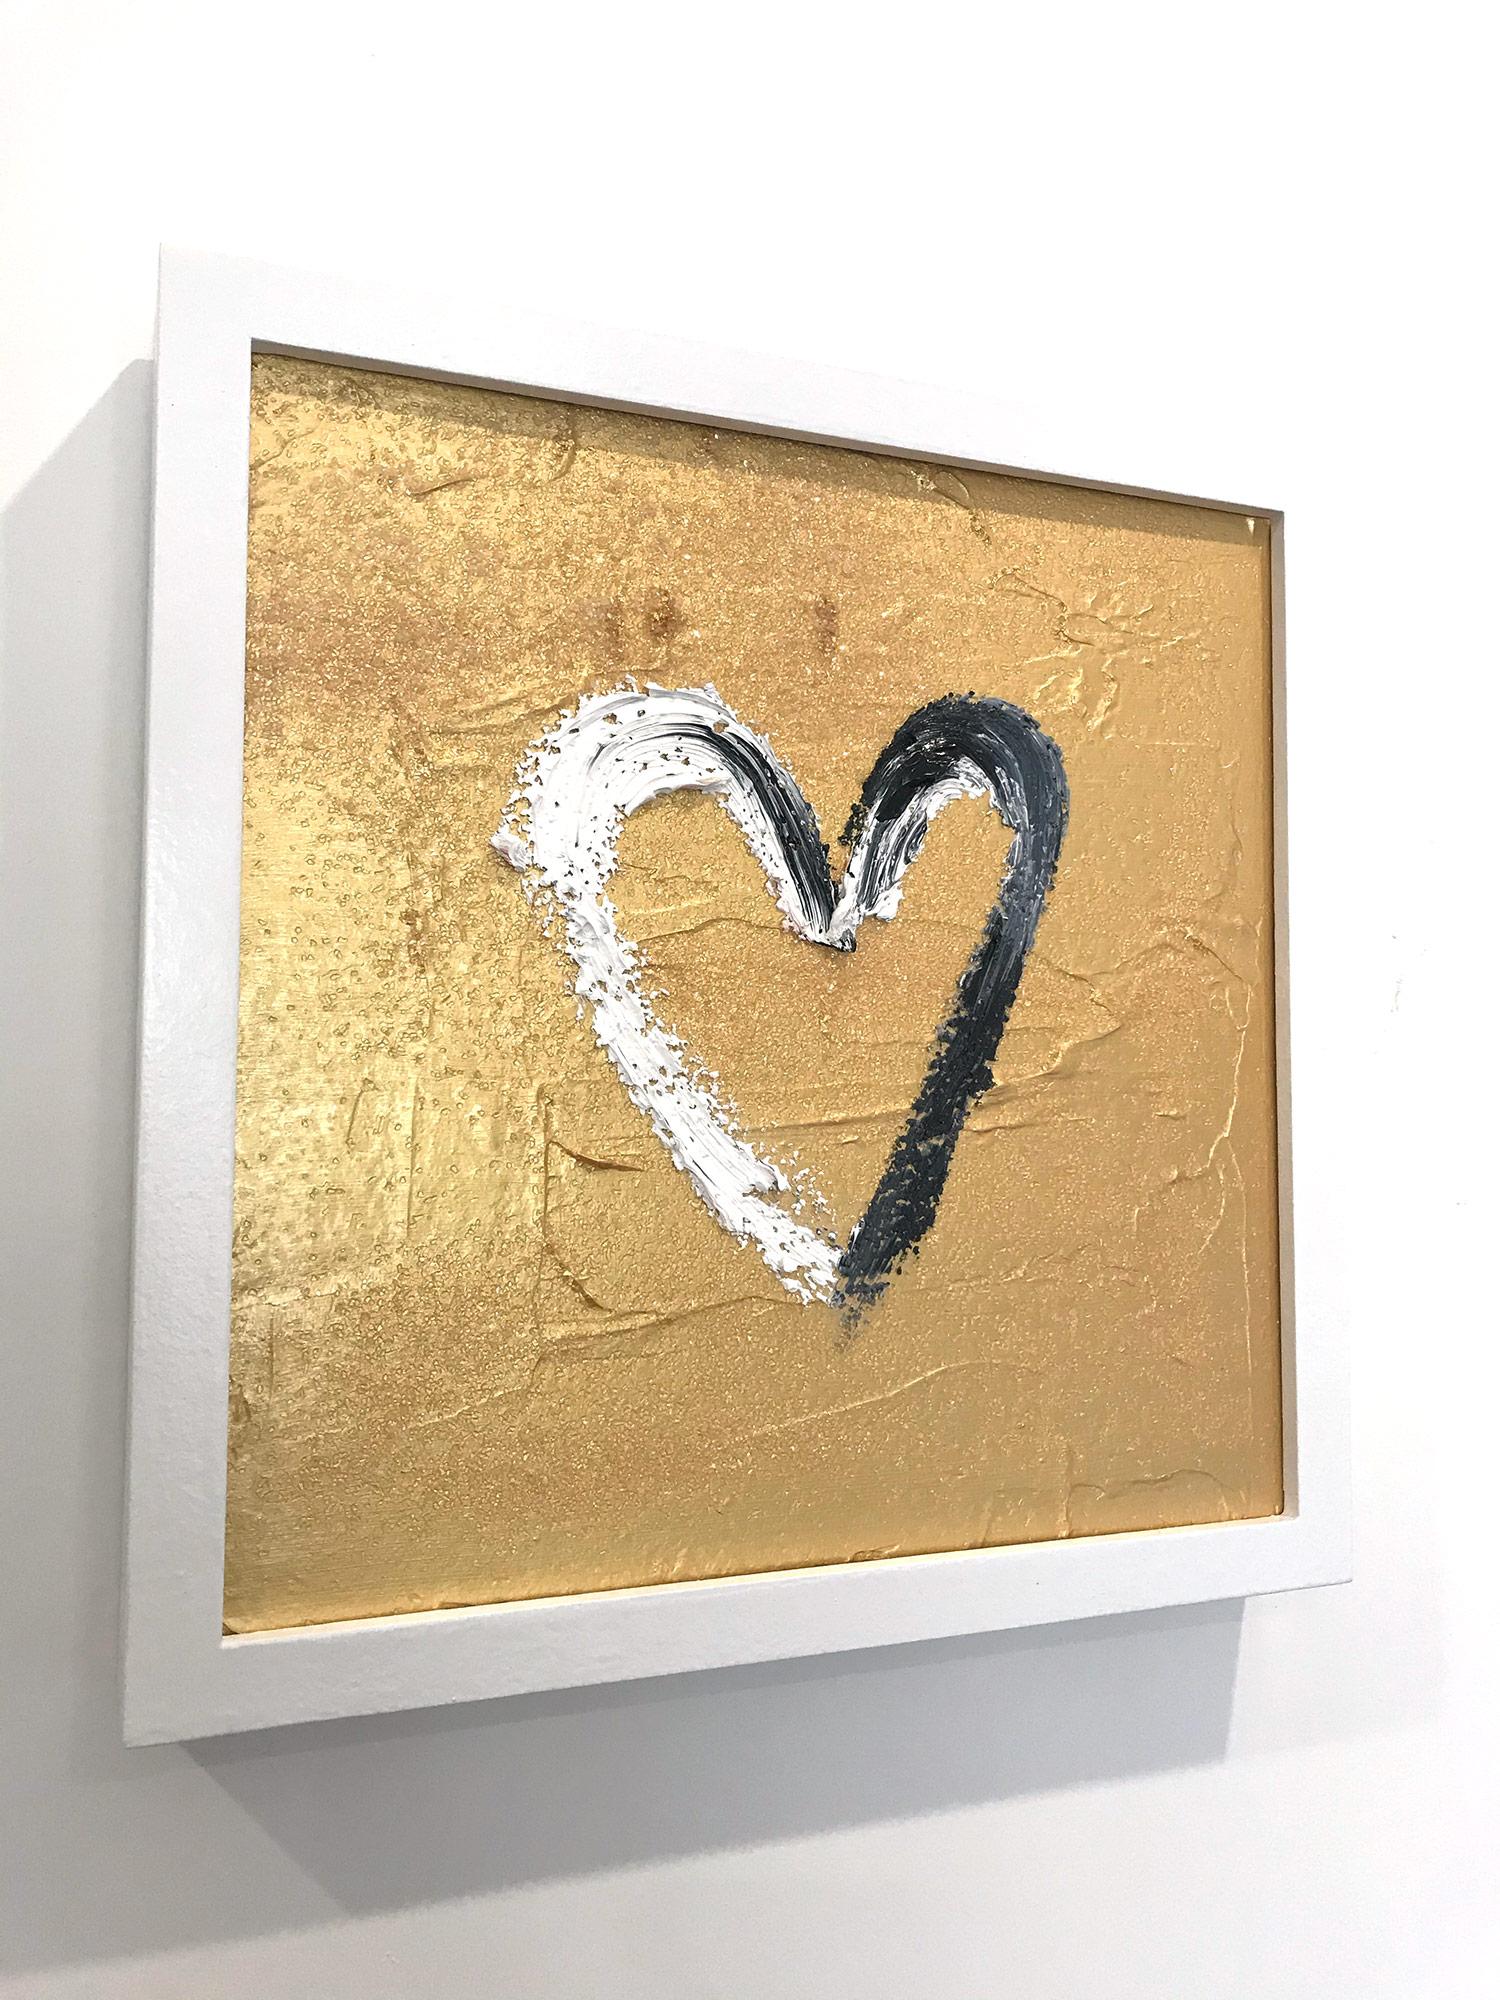 Motivated by bold color and fast brush work, we are moved by the simplicity and thick textured oil paints in these works. Shaoul’s “My Heart Collection” is a vibrant and energetic display of love encapsulated in these miniature hearts, leaving us